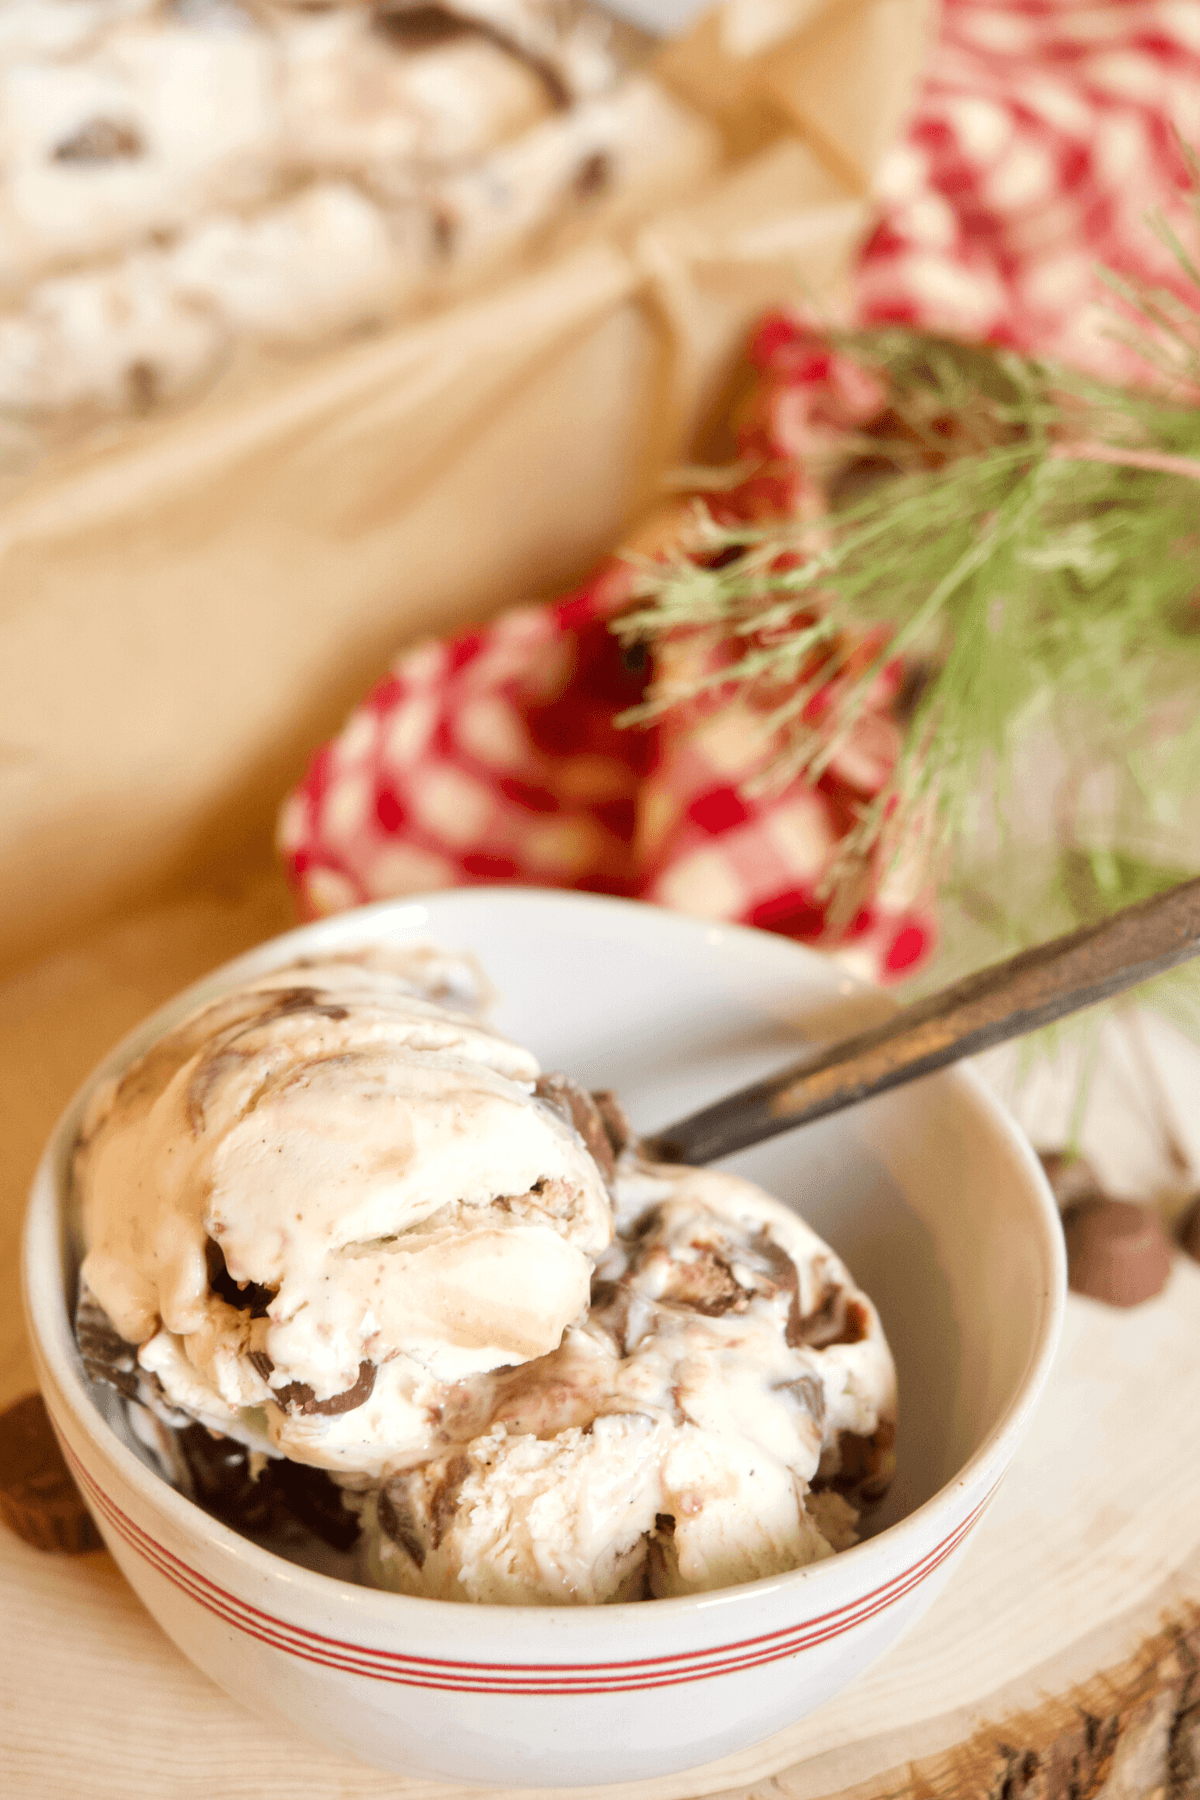 Moose tracks ice cream no churn scooped into small bowl with rustic spoon and checkered napkin behind with pine bough in shot.